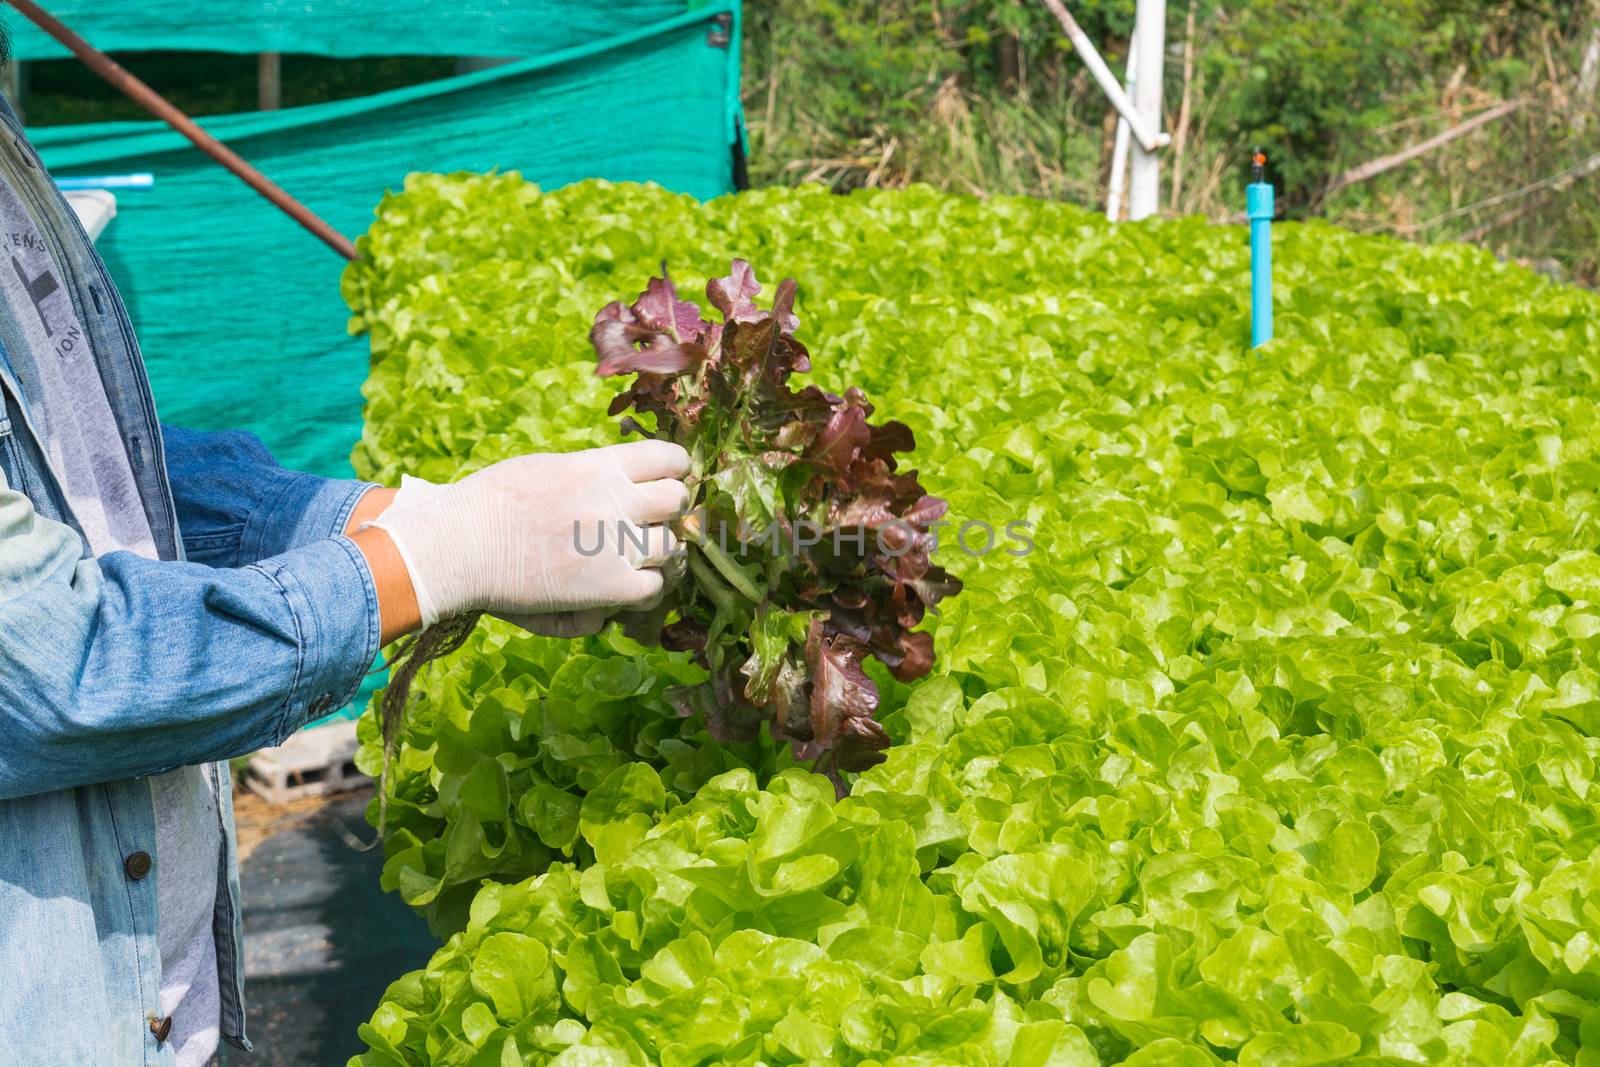 Hydroponics Organic Agriculture Farm System harvest, Farmer Hand holding vegetables, Green and Red Salad Lettuce, from Plastic Pipe in his hands as Harvesting in Modern Agricultural Farming.